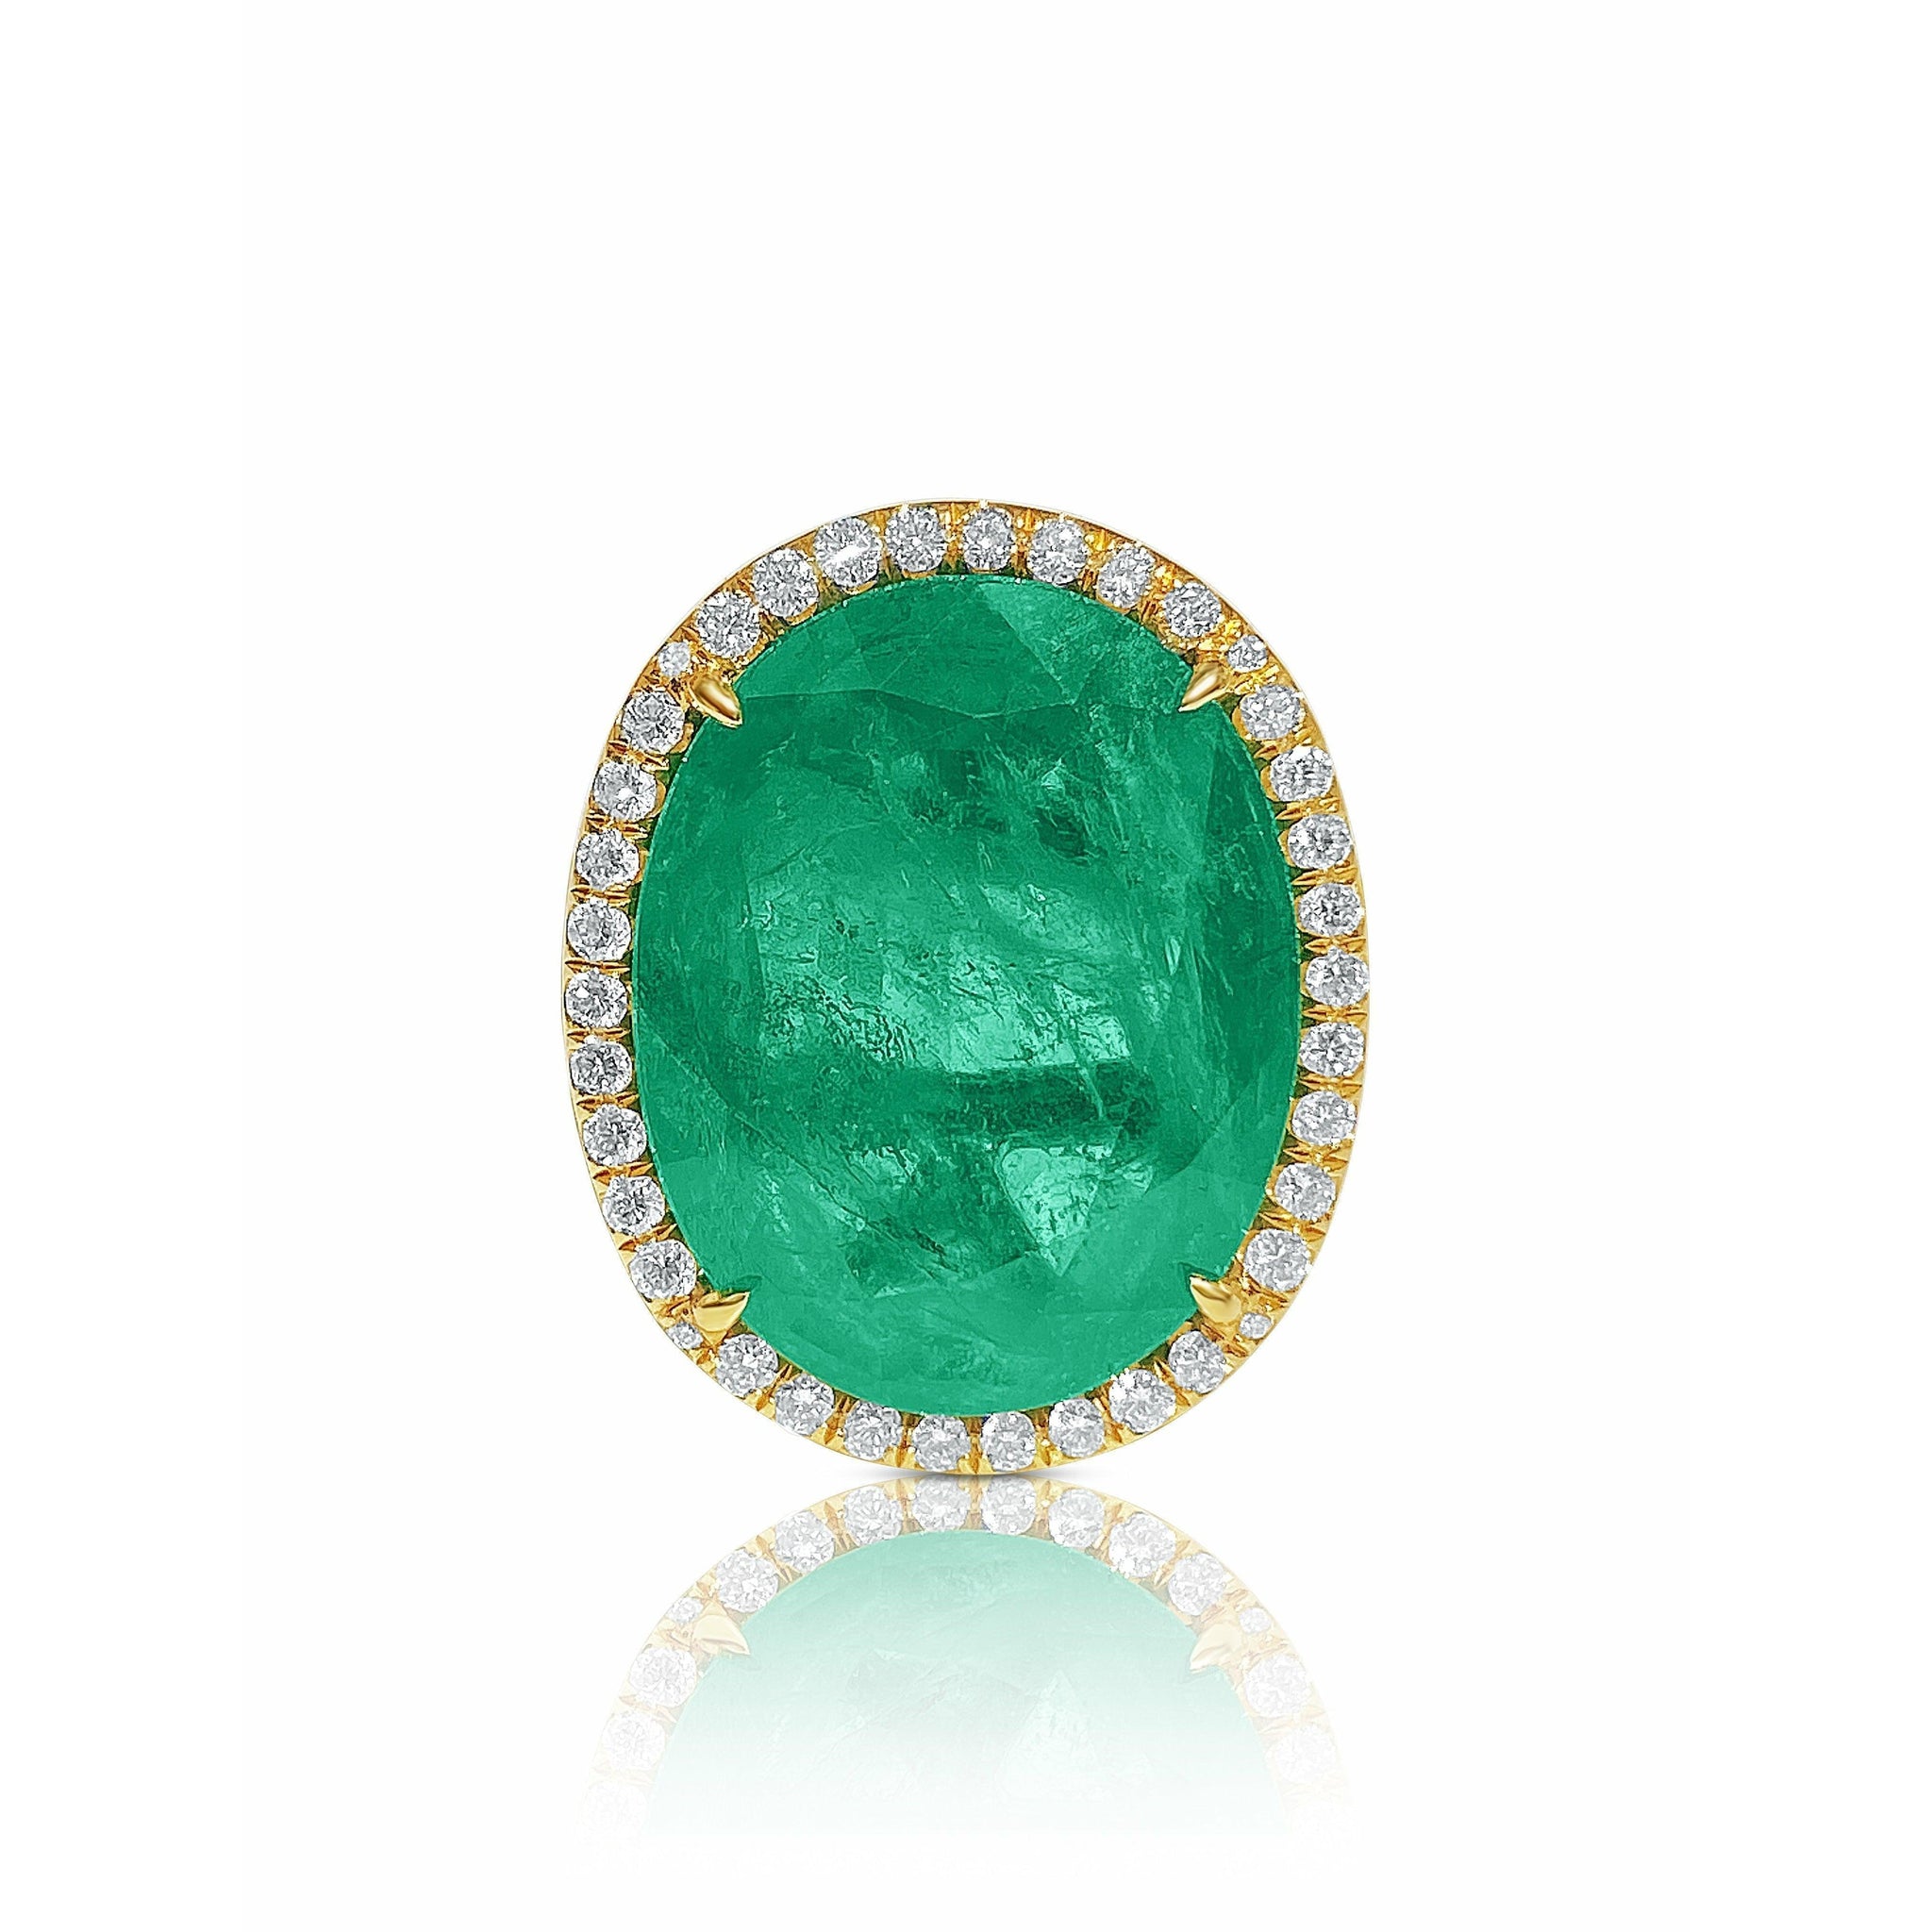 10 Carat GIA certified Oval Cut Emerald set in 18k solid gold ring - ASSAY